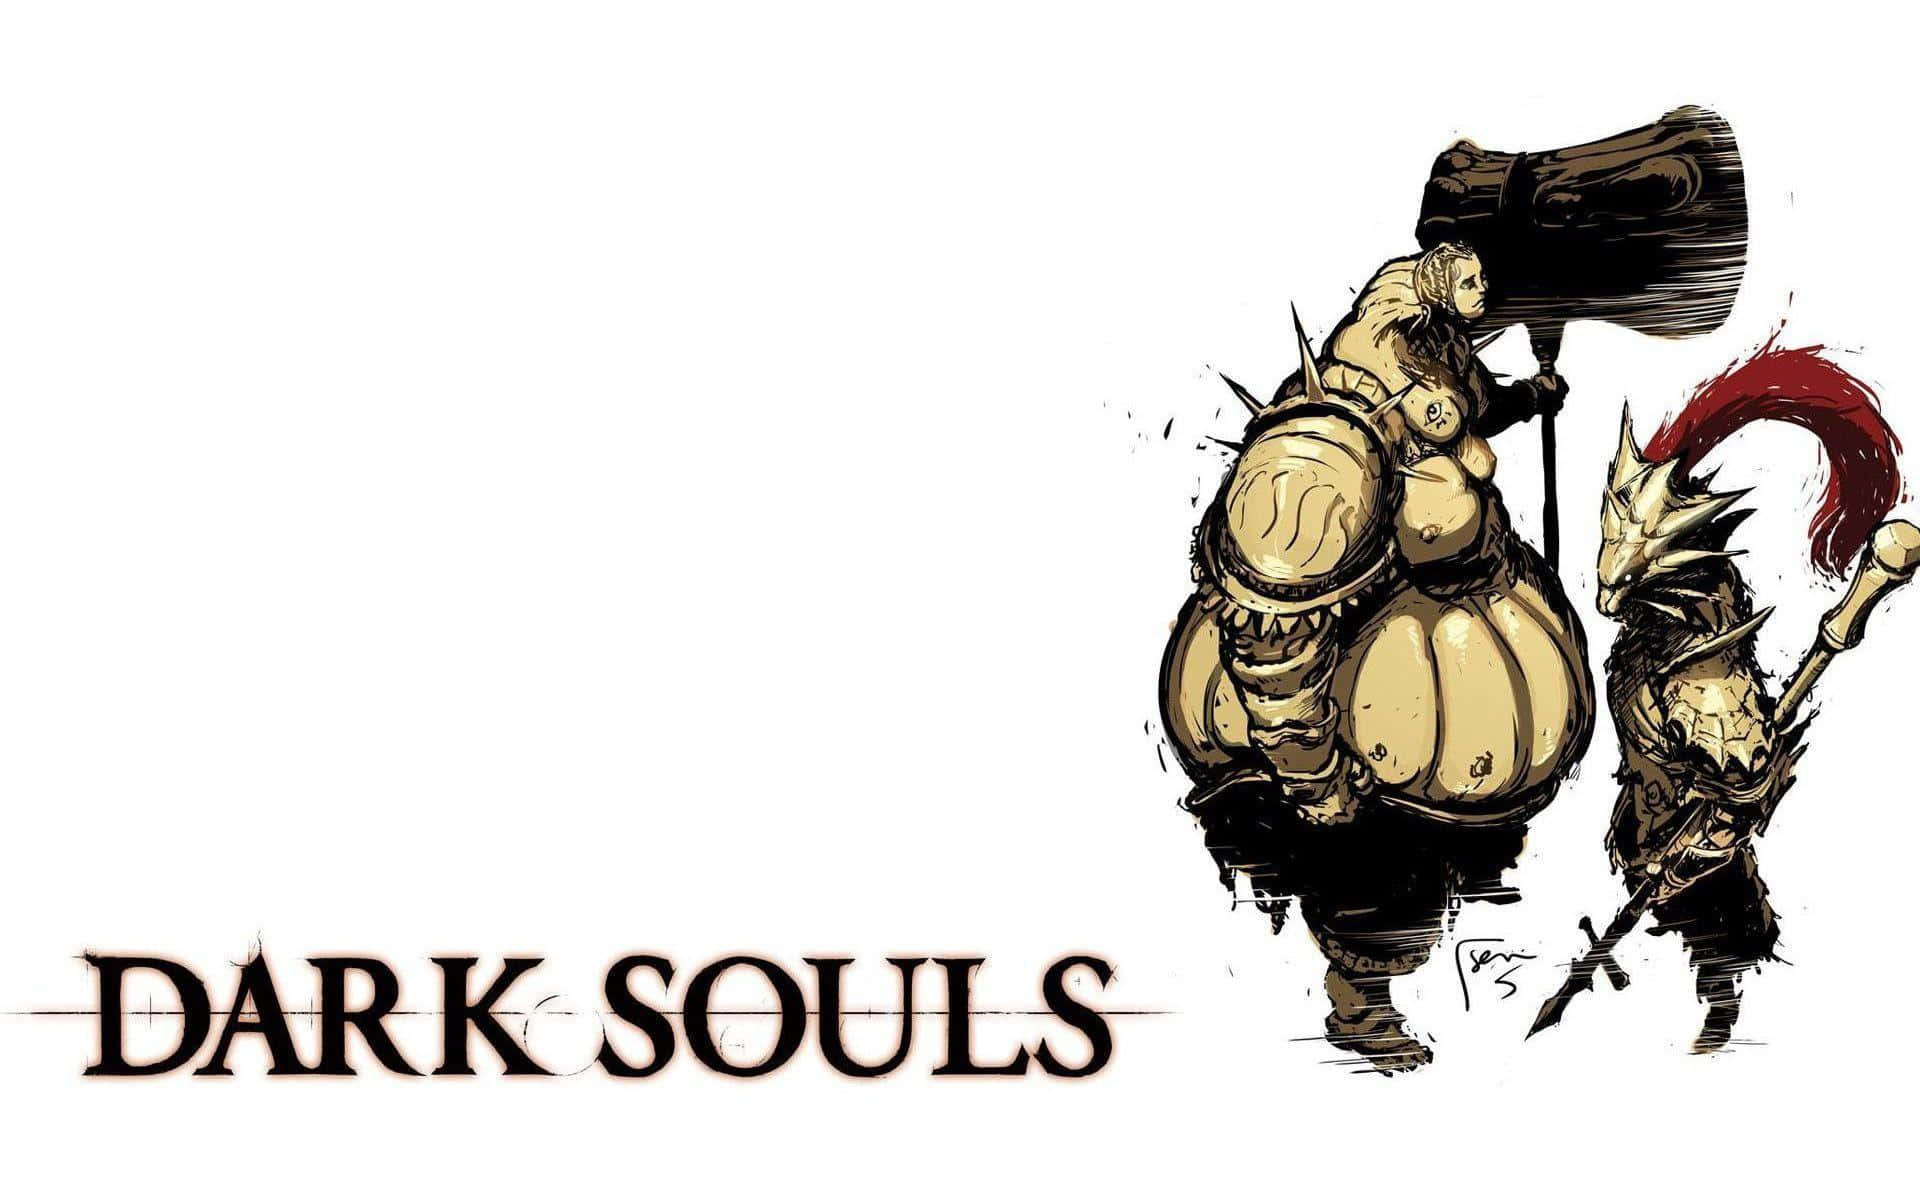 Seize your destiny in the mythical world of Dark Souls